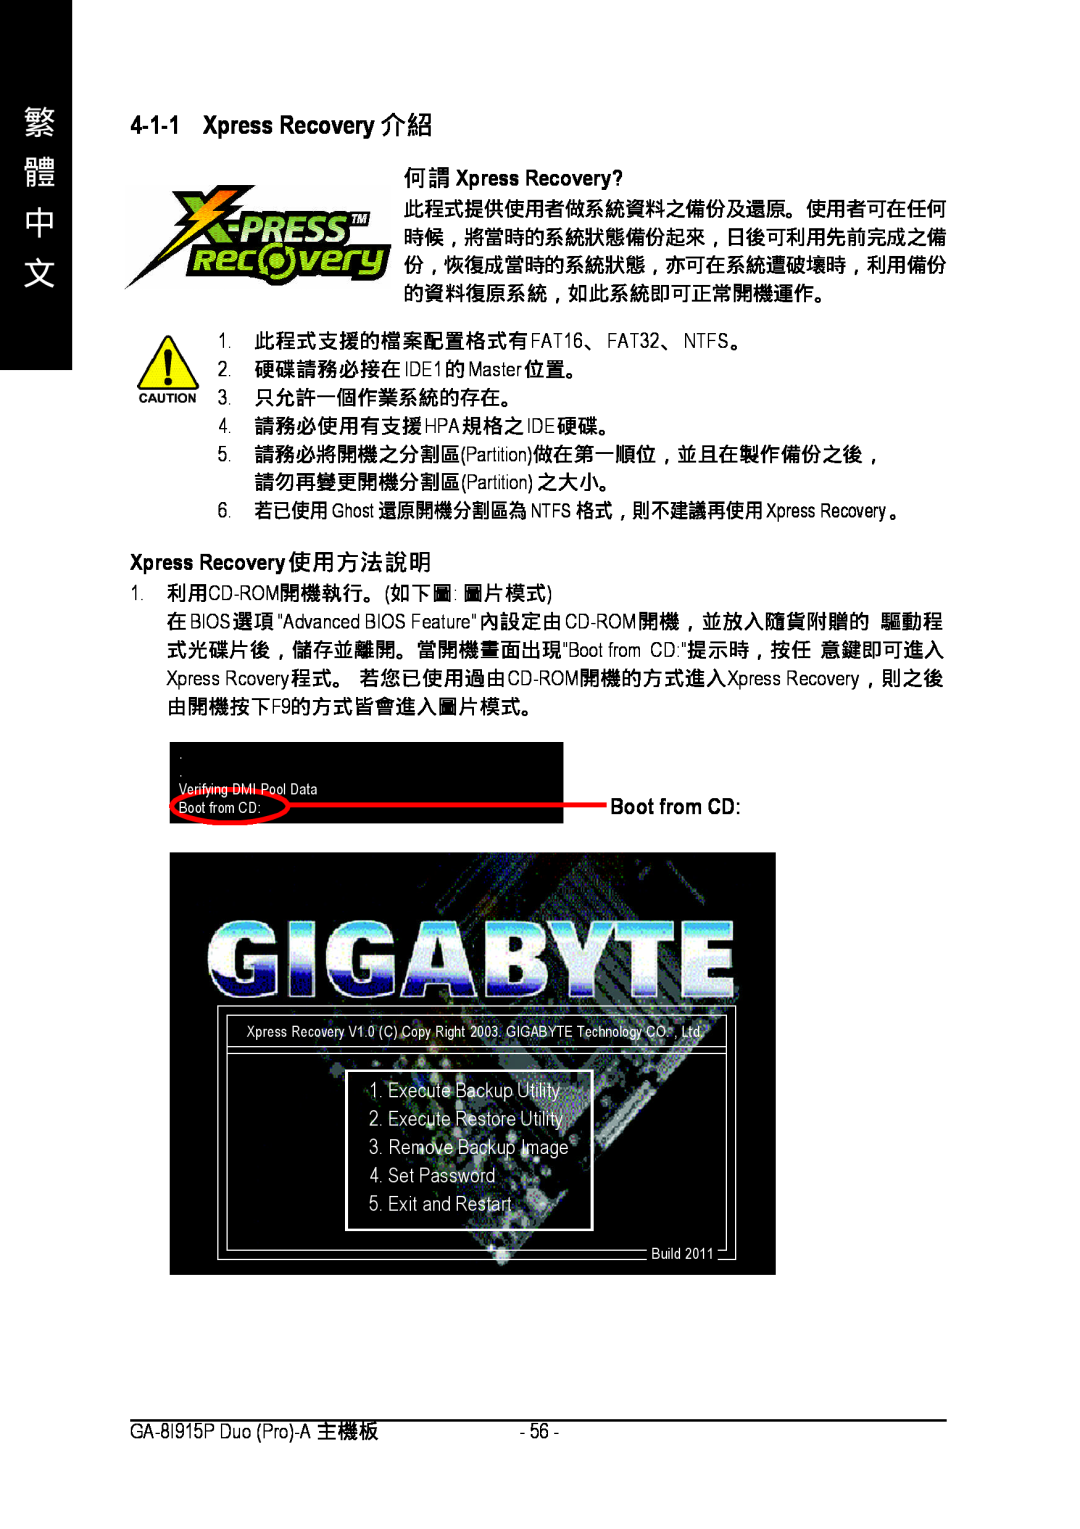 Gigabyte GA-8I915P manual Xpress Recovery?, Boot from CD 